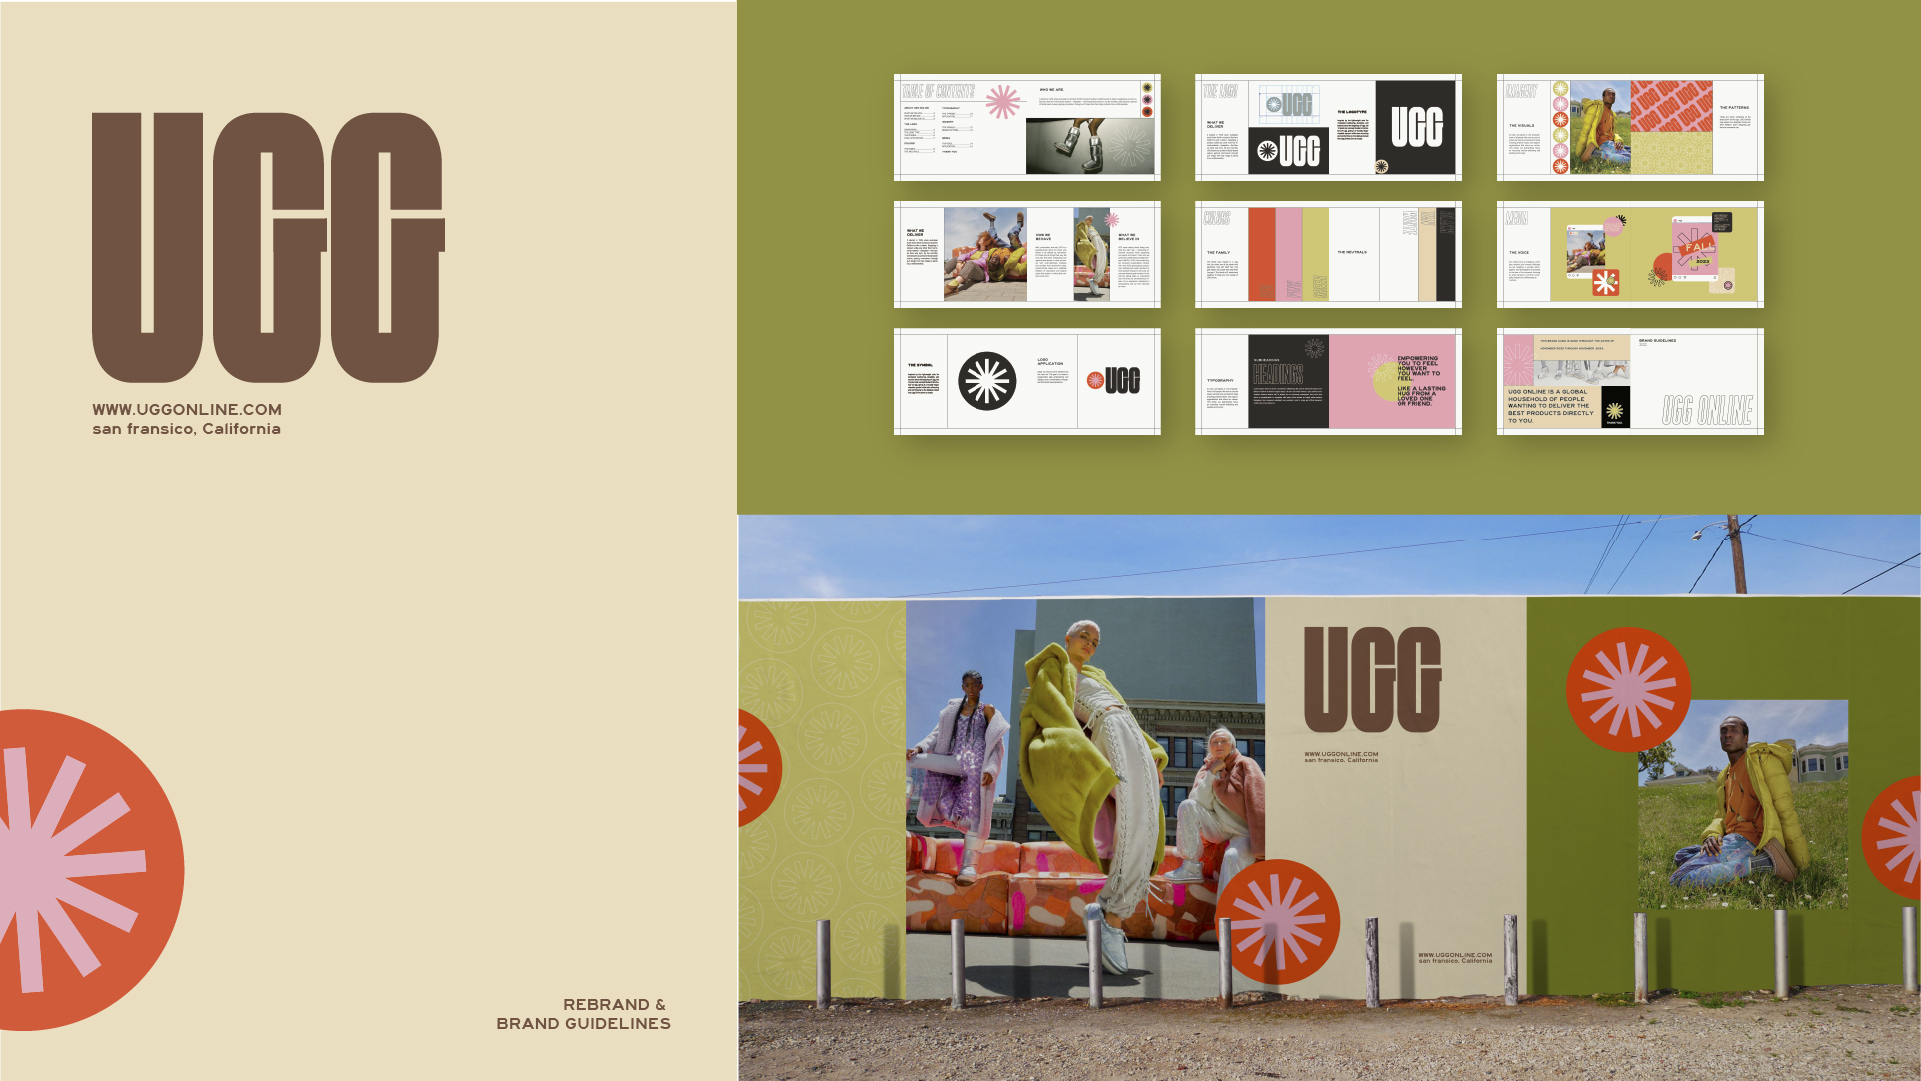 UGG online / “UGG online,” Branding project for digital presence, dimensions vary, 2021. UGG online is a digital store exclusive to UGG’s online customers. The new branding to represent this concept was designed to appeal to a digital audience, incorporating earthy el